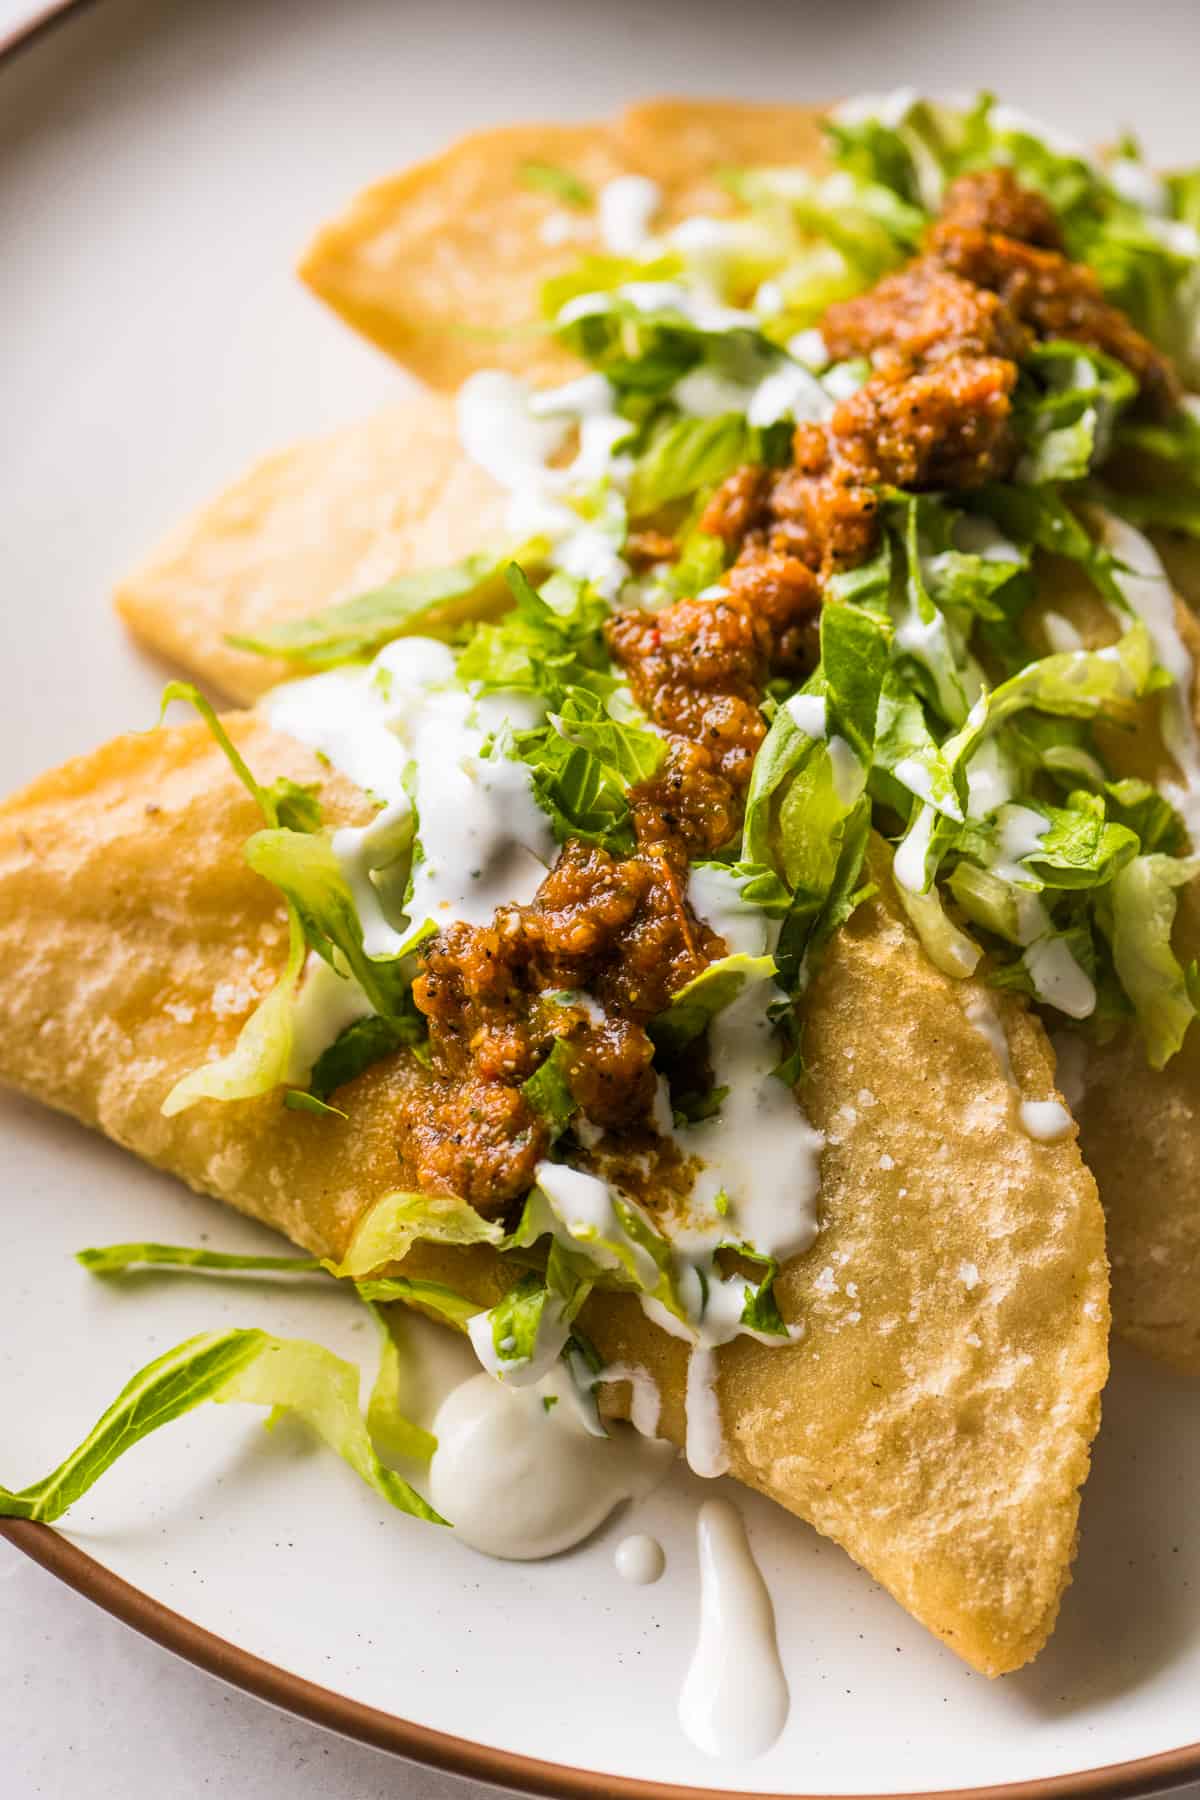 Golden and crispy fried quesadillas garnished with lettuce, Mexican crema, and salsa.